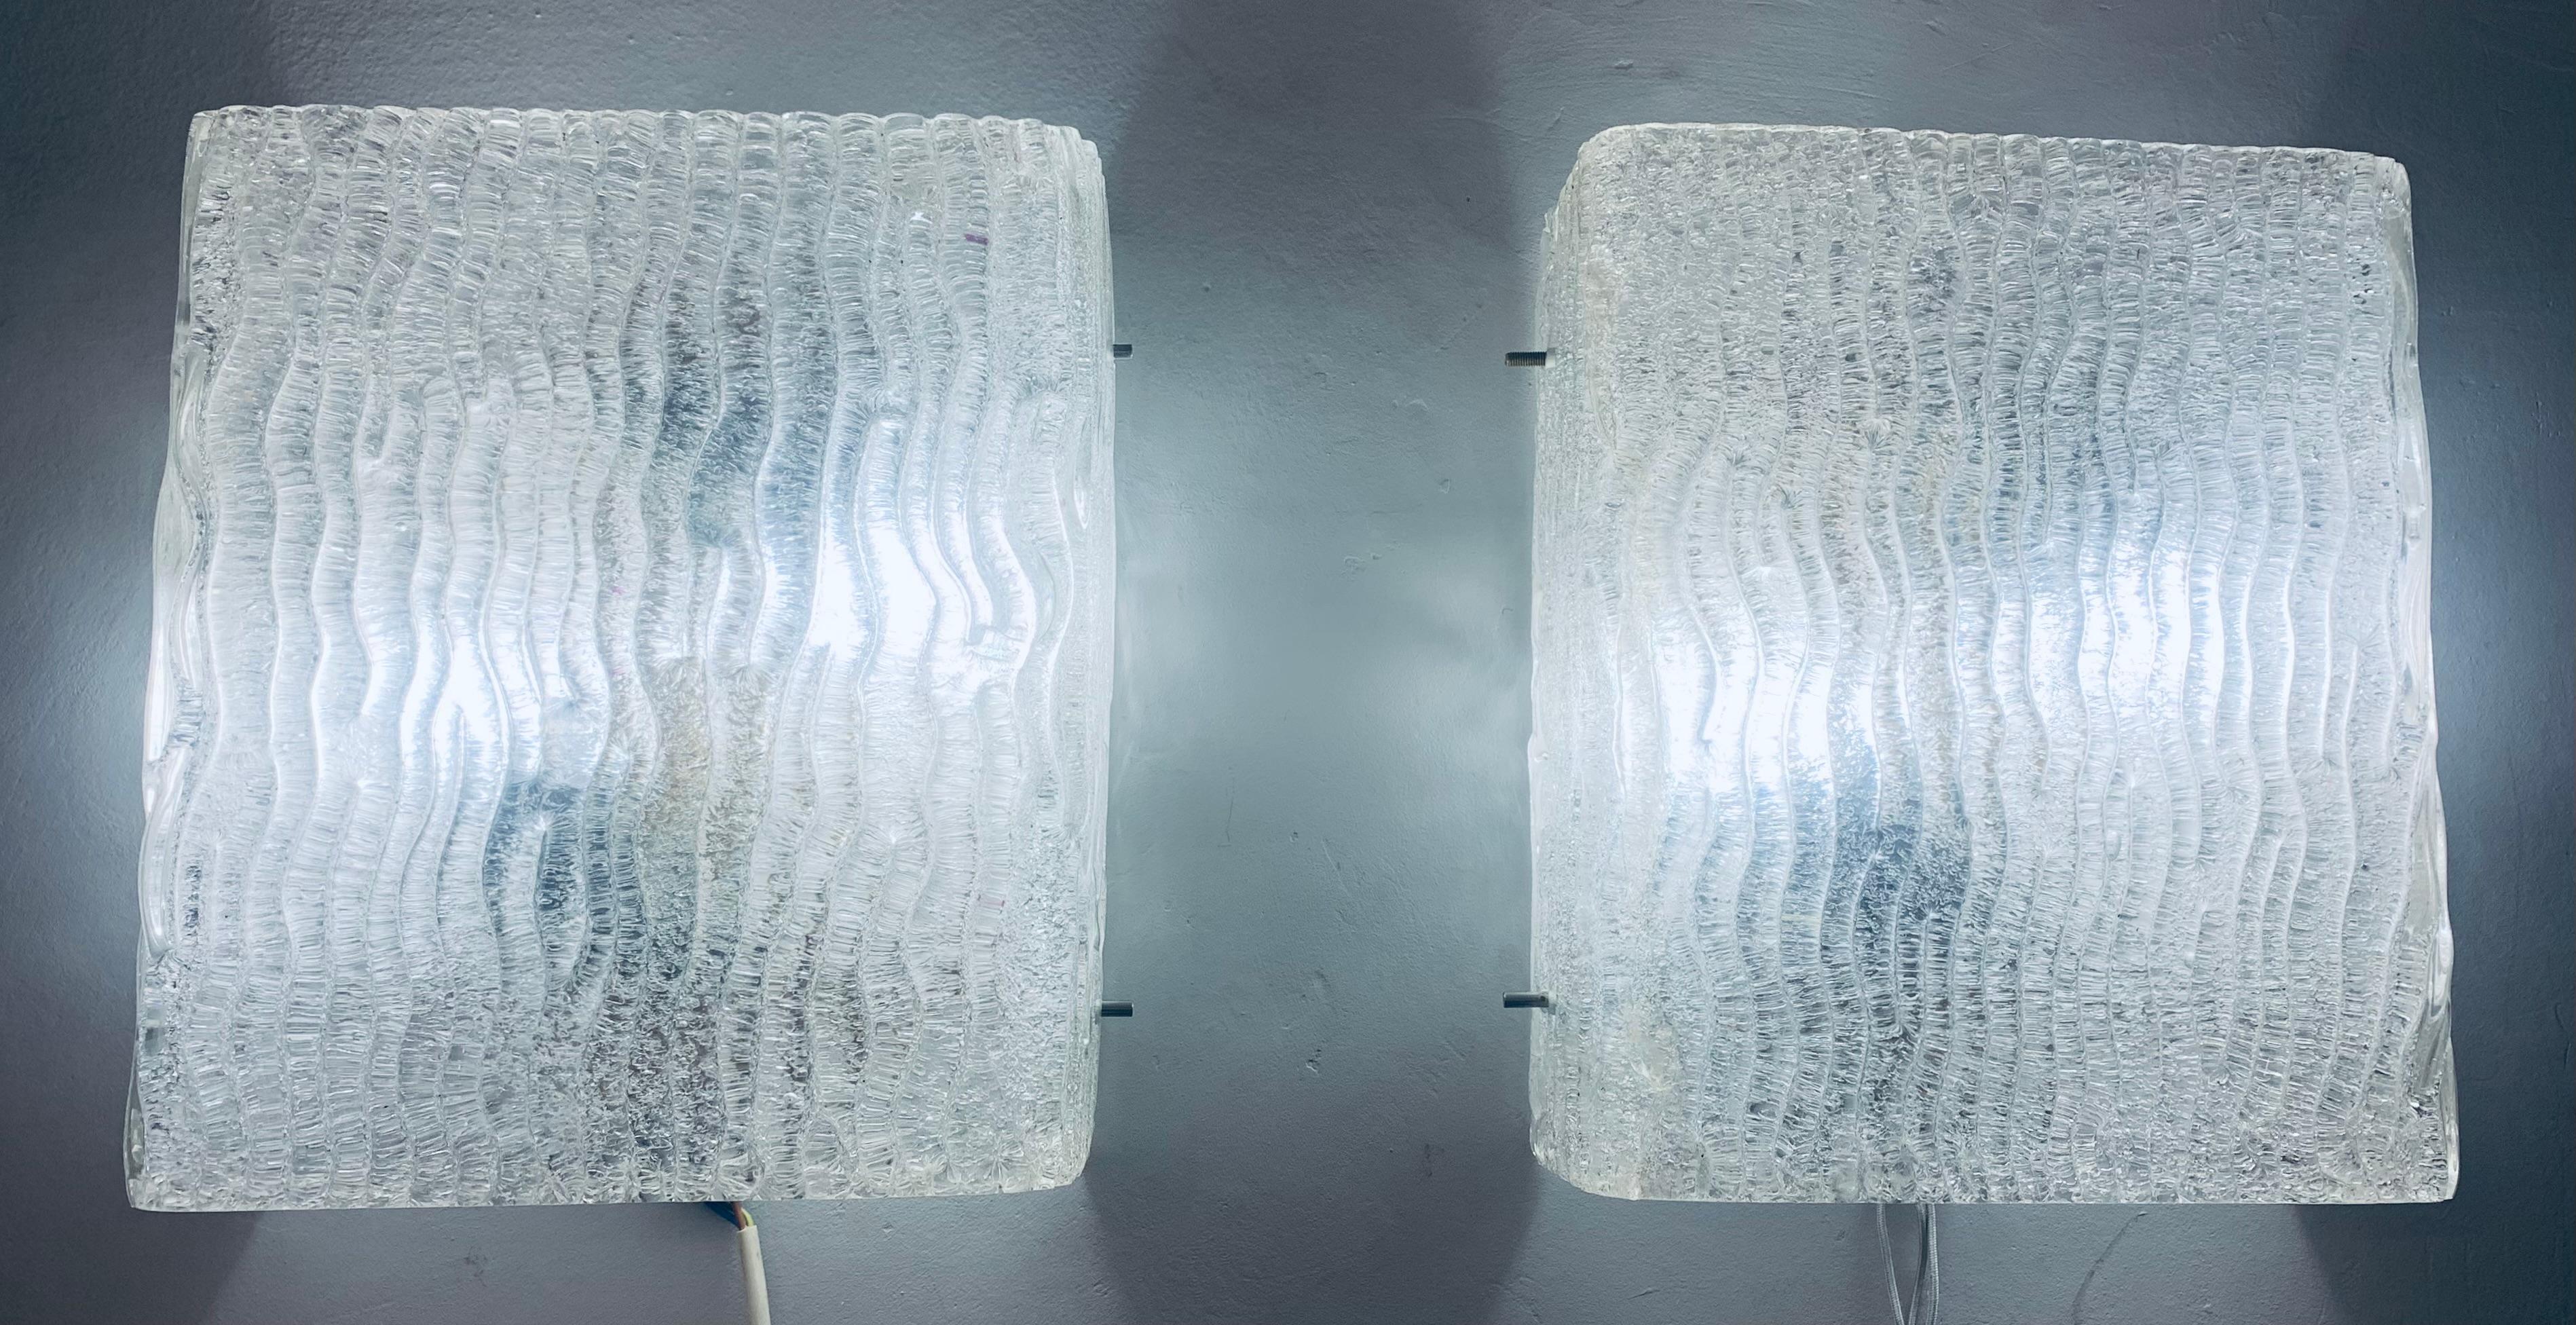 Pair of large 1960s wall lights or wall sconces designed by J.T. Kalmar and manufactured by Kalmar Lighting in Vienna, Austria. The heavy sculpted, textured, molded glass has a vertical wave pattern covering its entire outside surface which produces